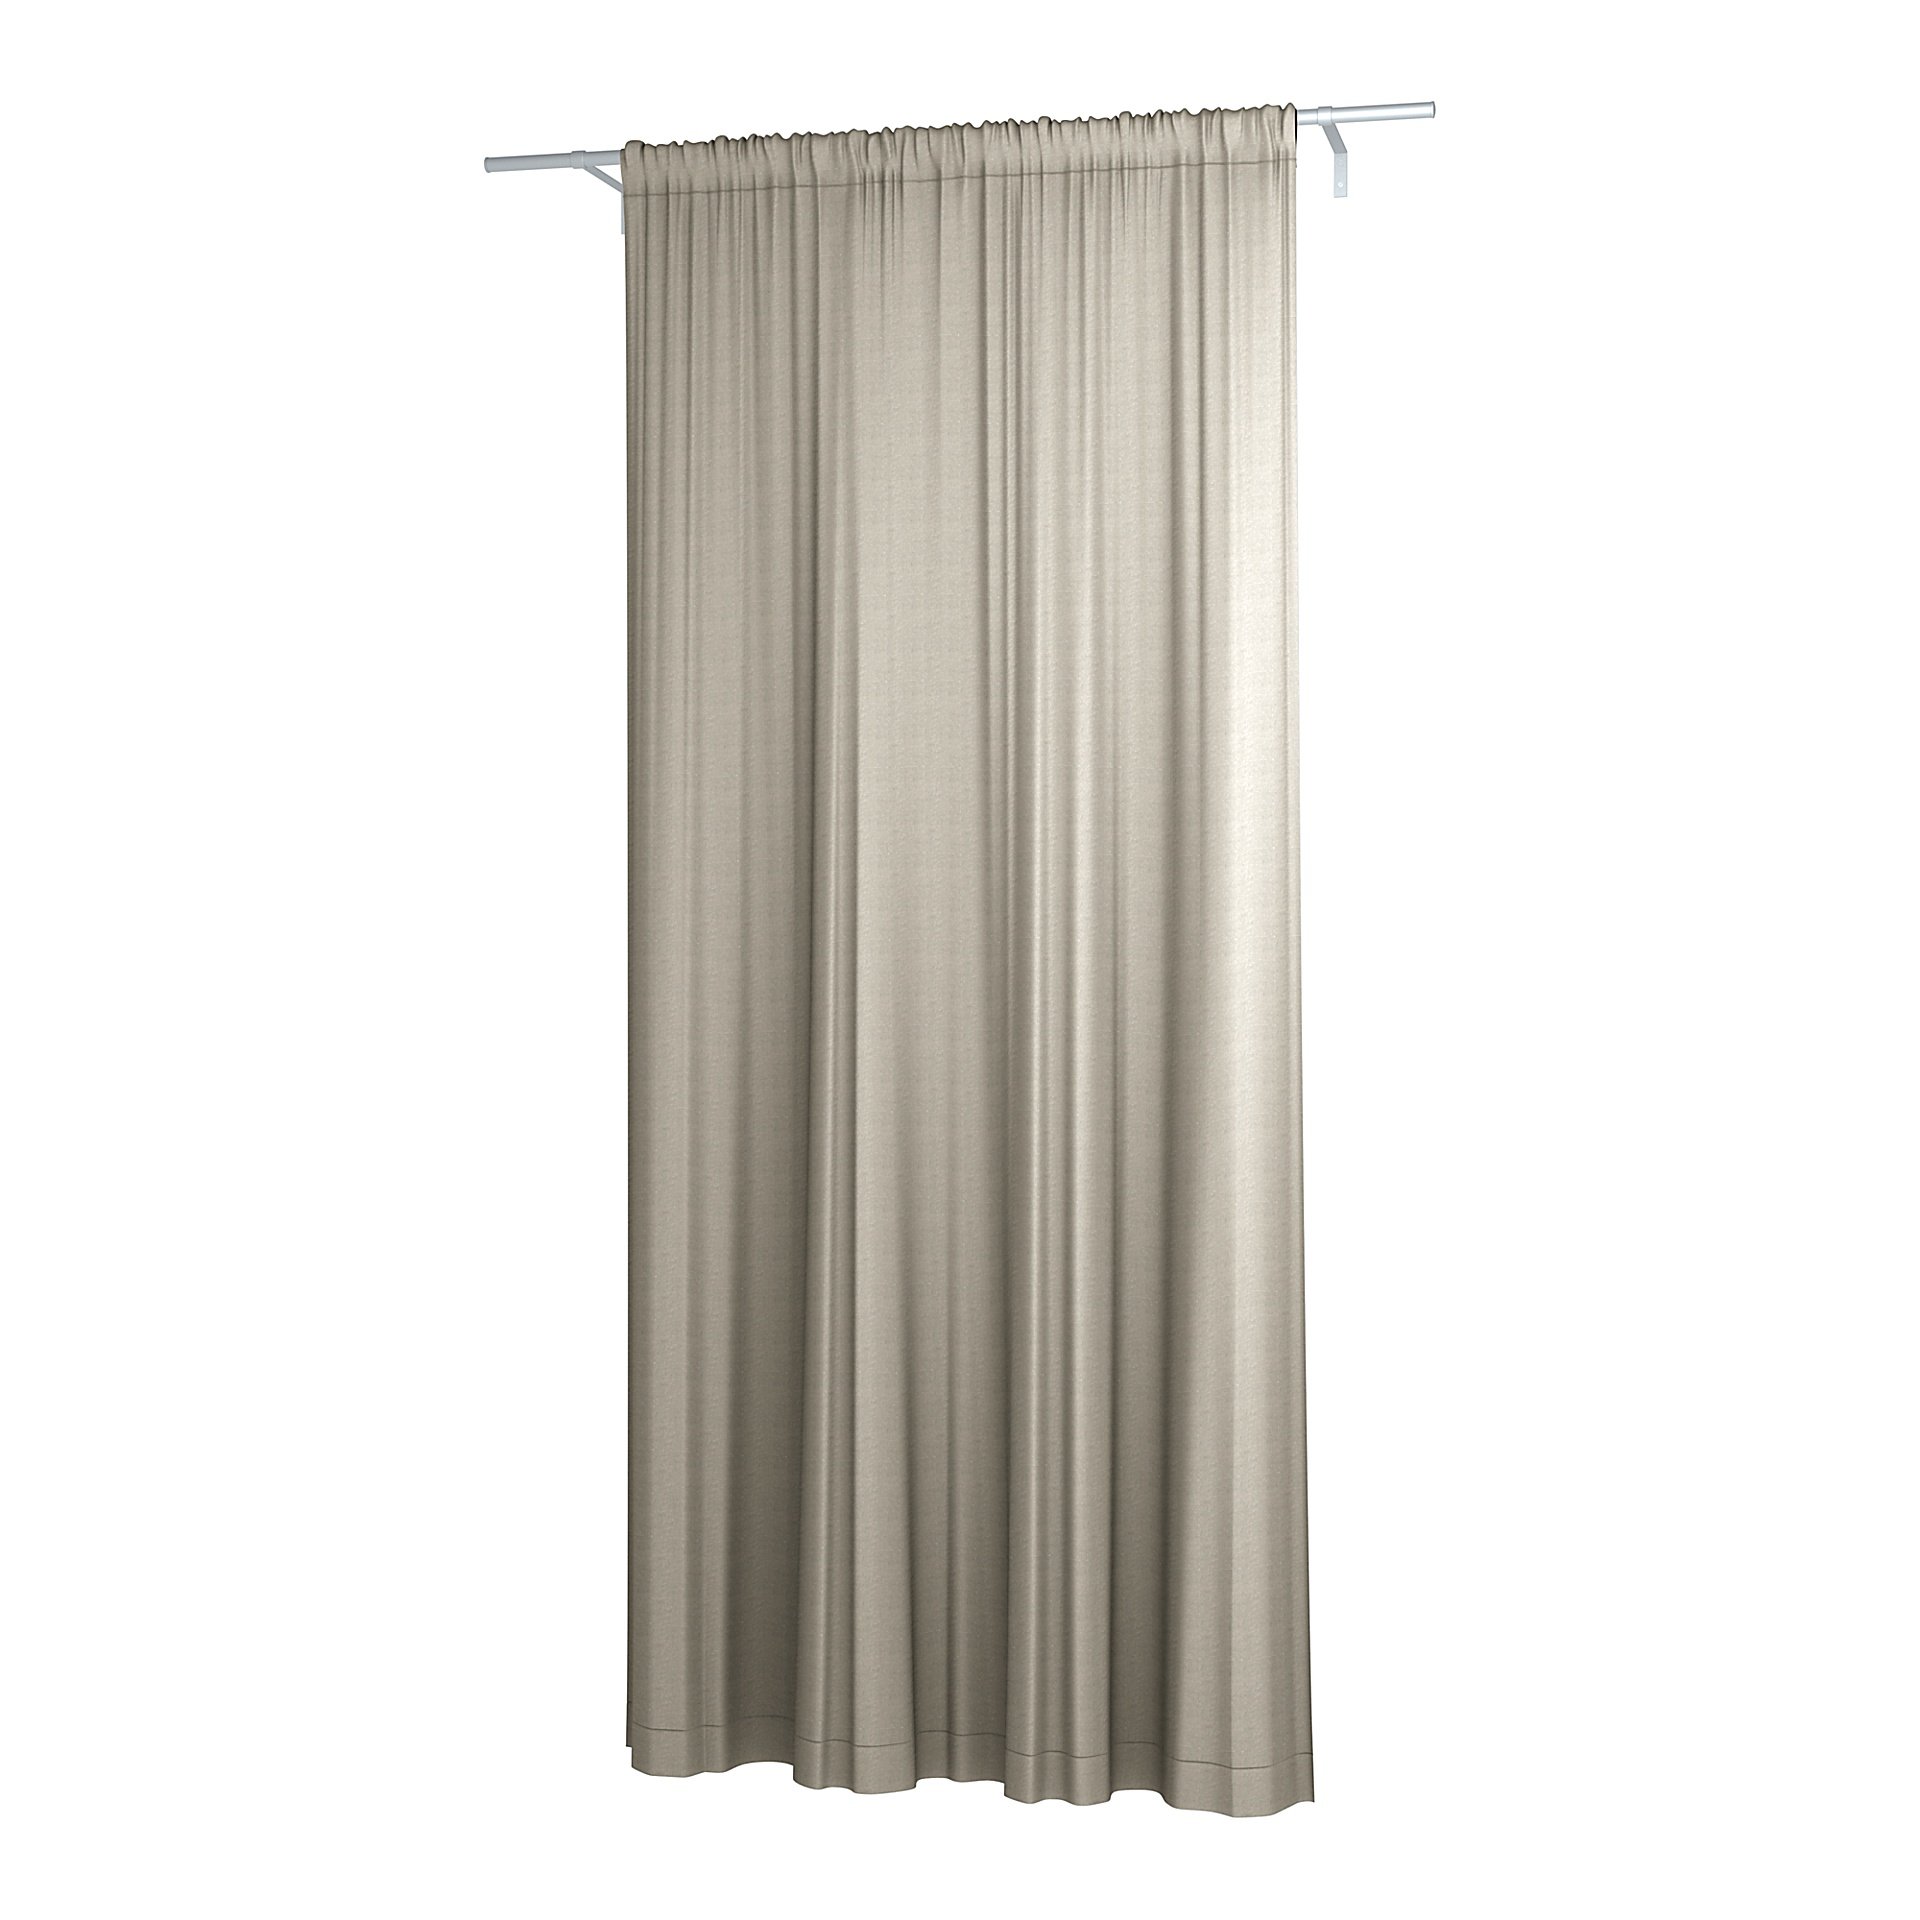 Double Width Curtain Panel with Tunnel/Creaseband, Lined, Customized, Natural, Linen - Bemz